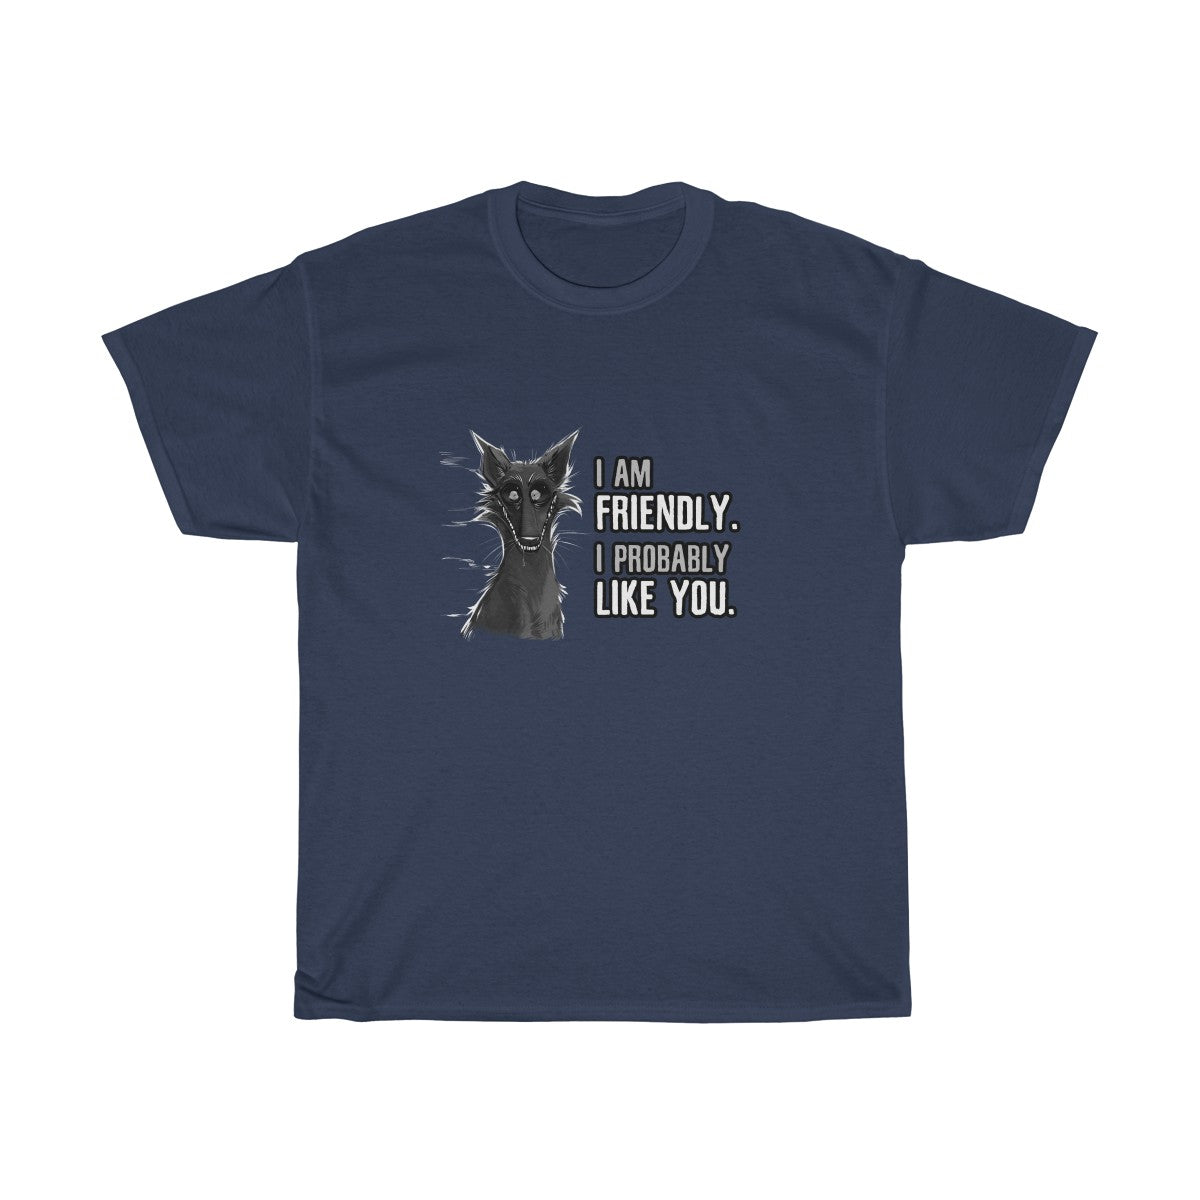 I probably DON'T hate you -T-Shirt T-Shirt Cyamallo Navy Blue S 